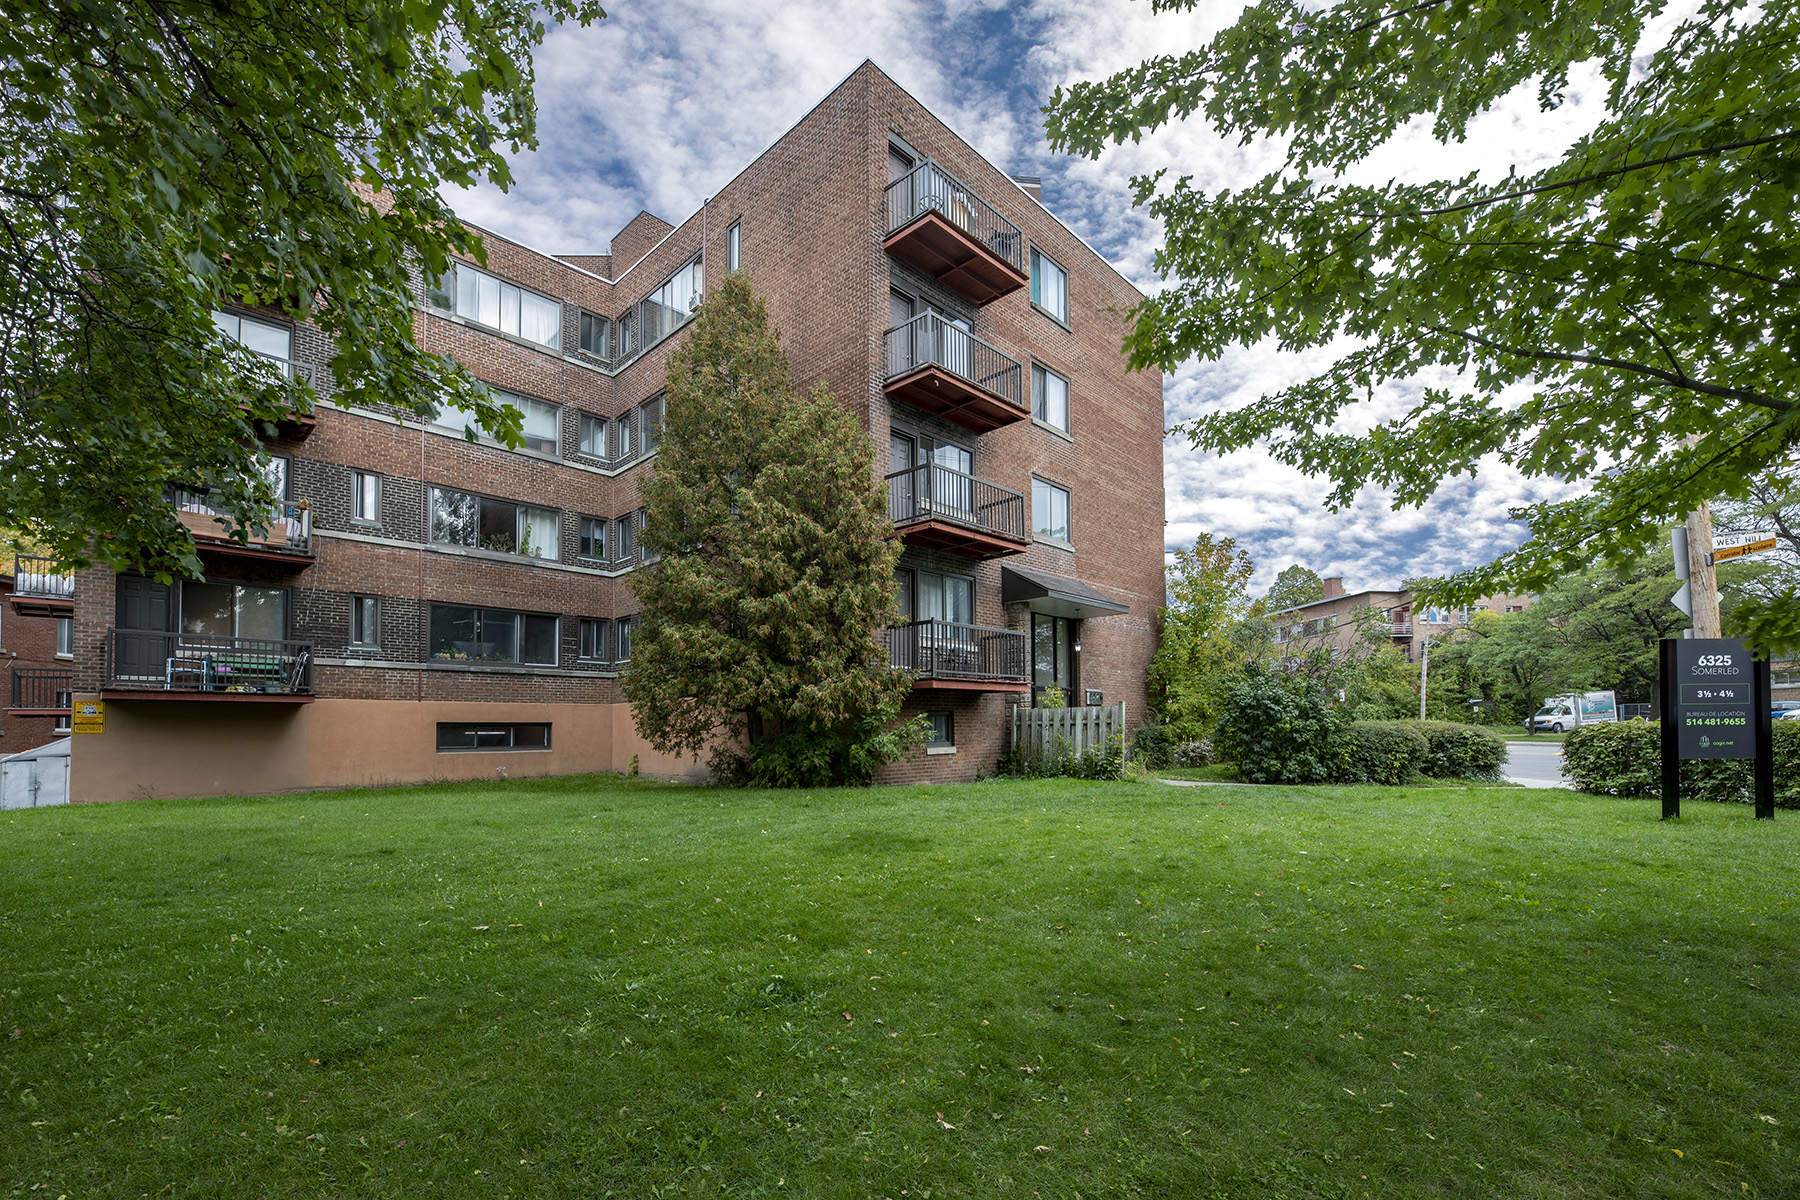 1 bedroom Apartments for rent in Notre-Dame-de-Grace at 6325 Somerled - Photo 02 - RentersPages – L401538